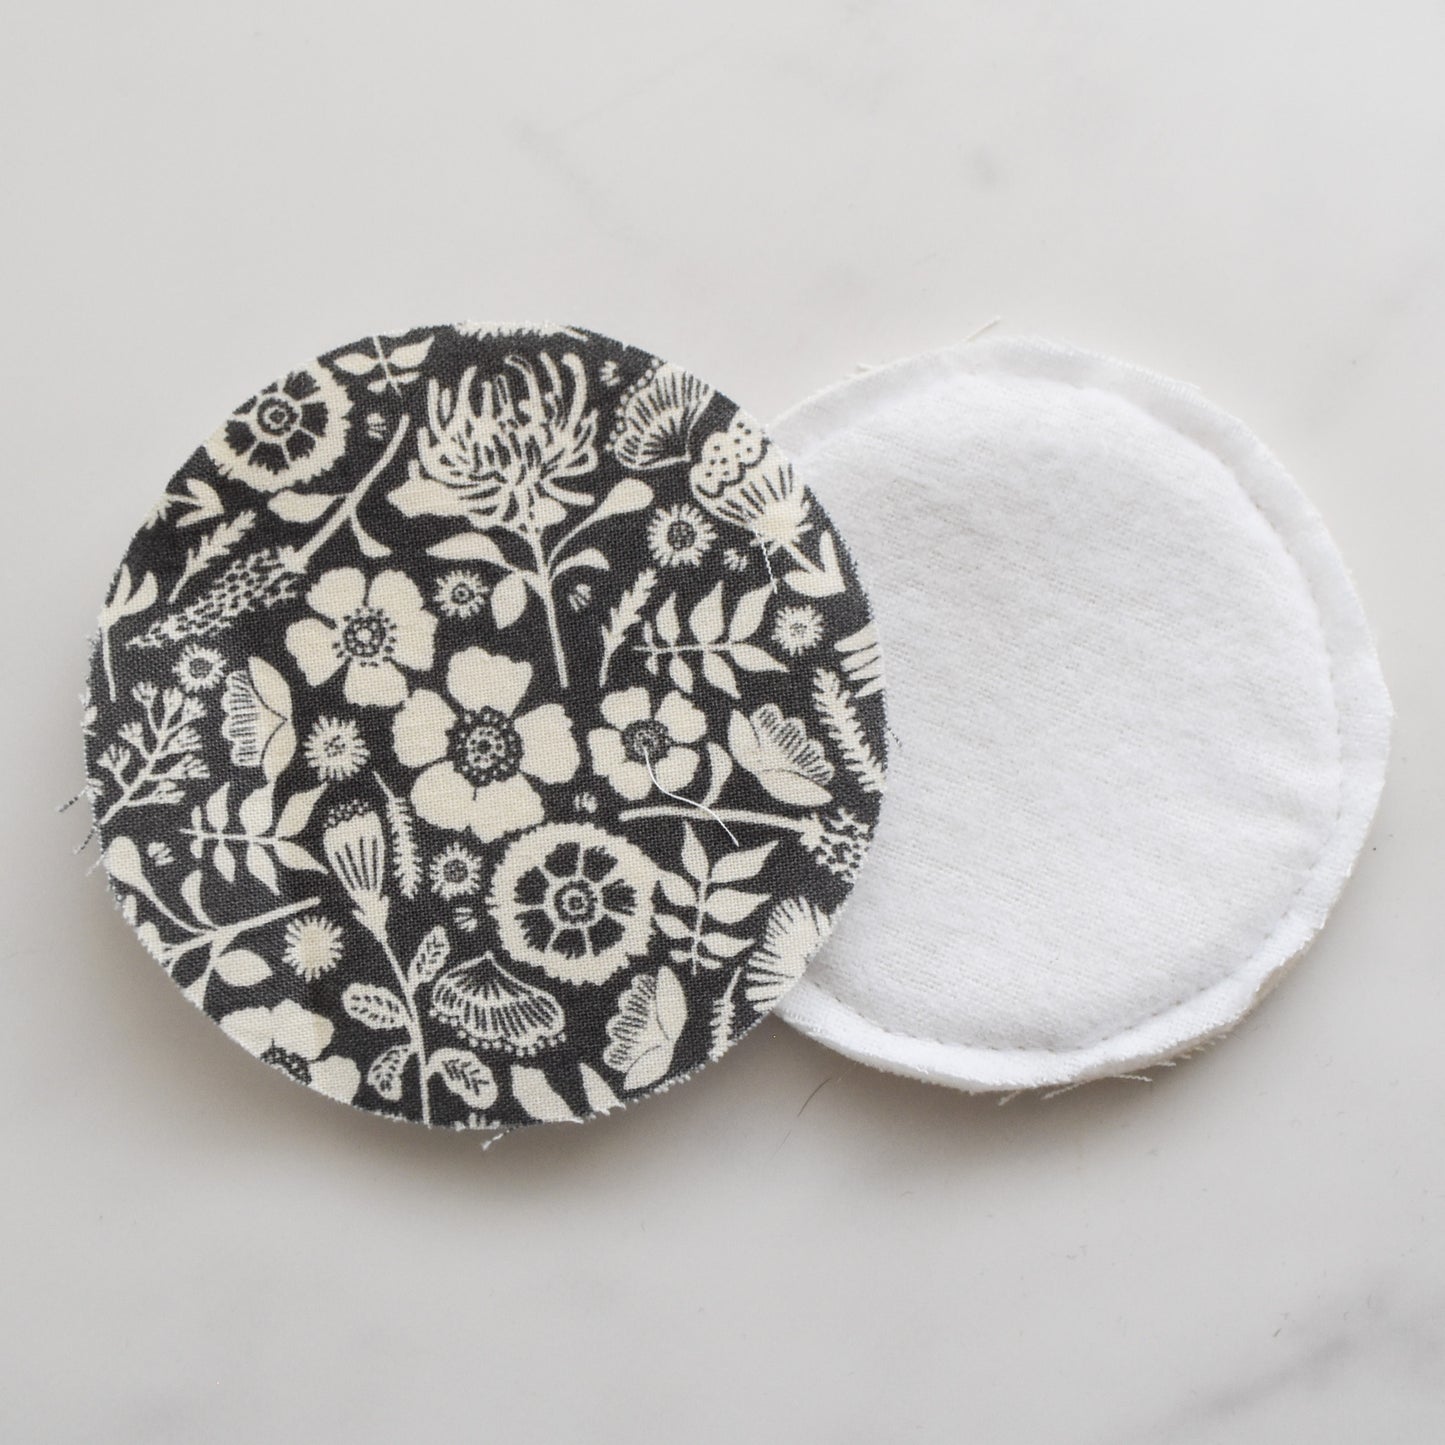 Earl Grey Blossoms Cotton Rounds